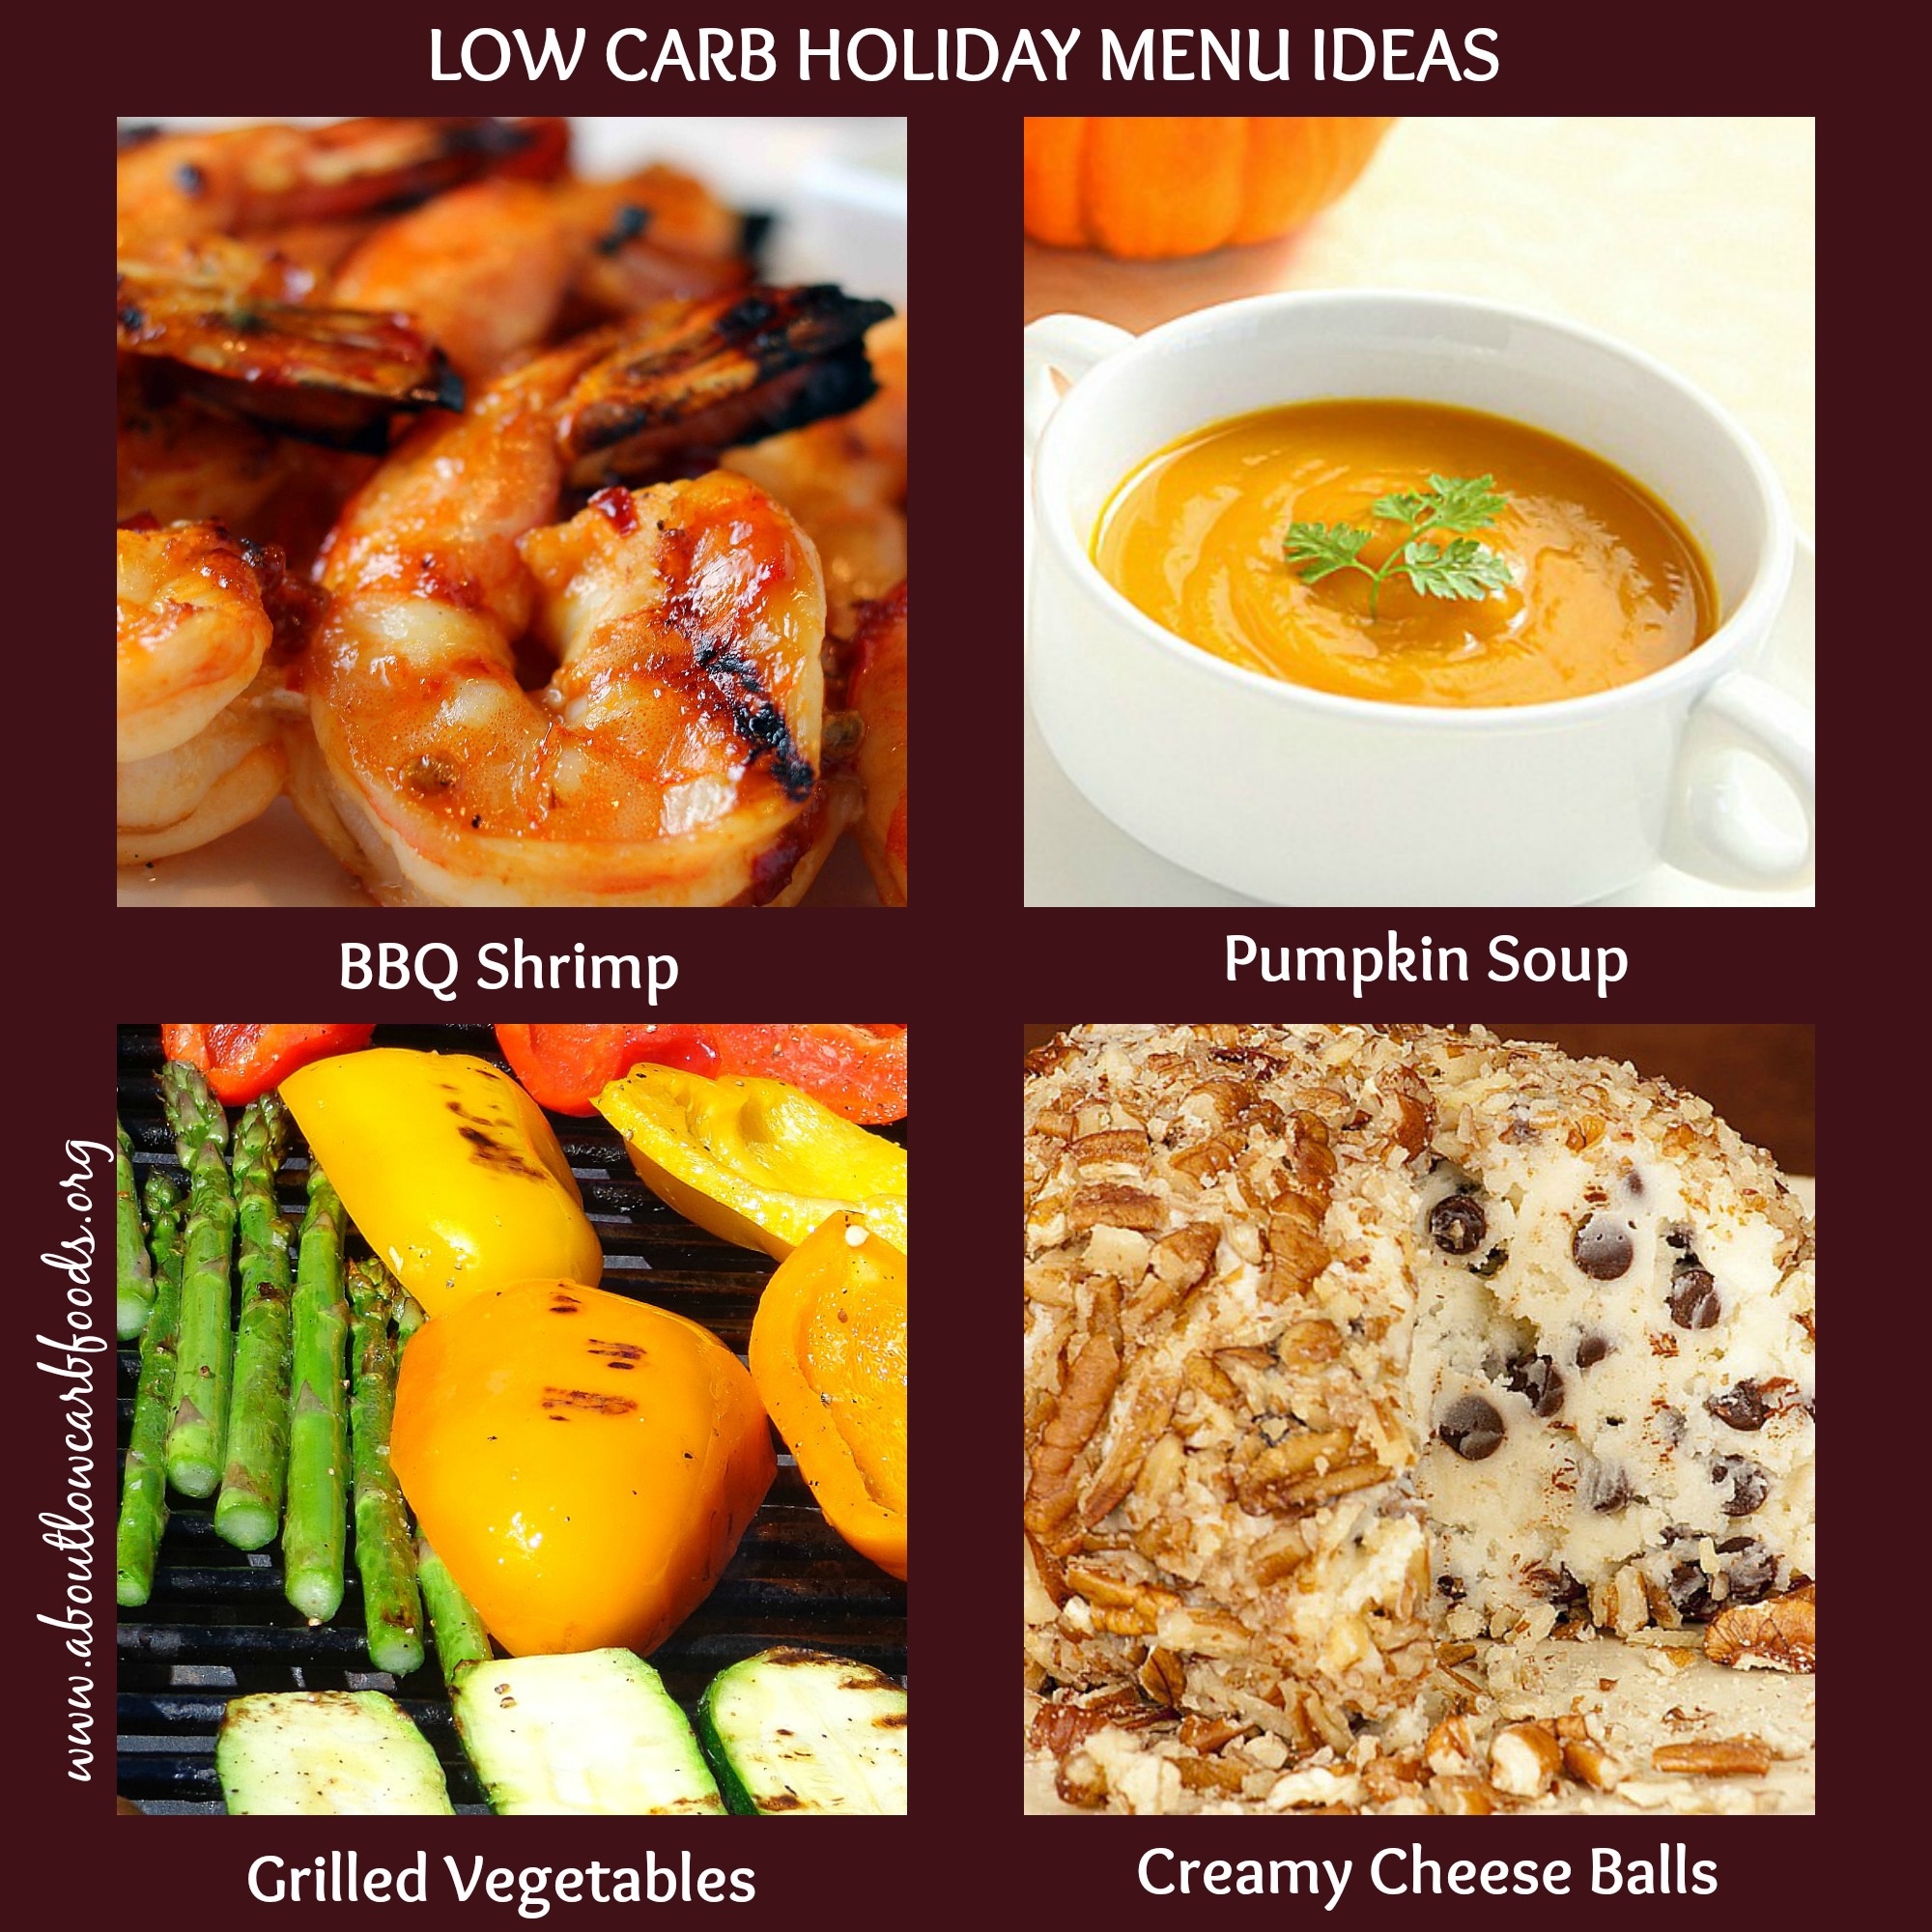 Low Carb Holiday